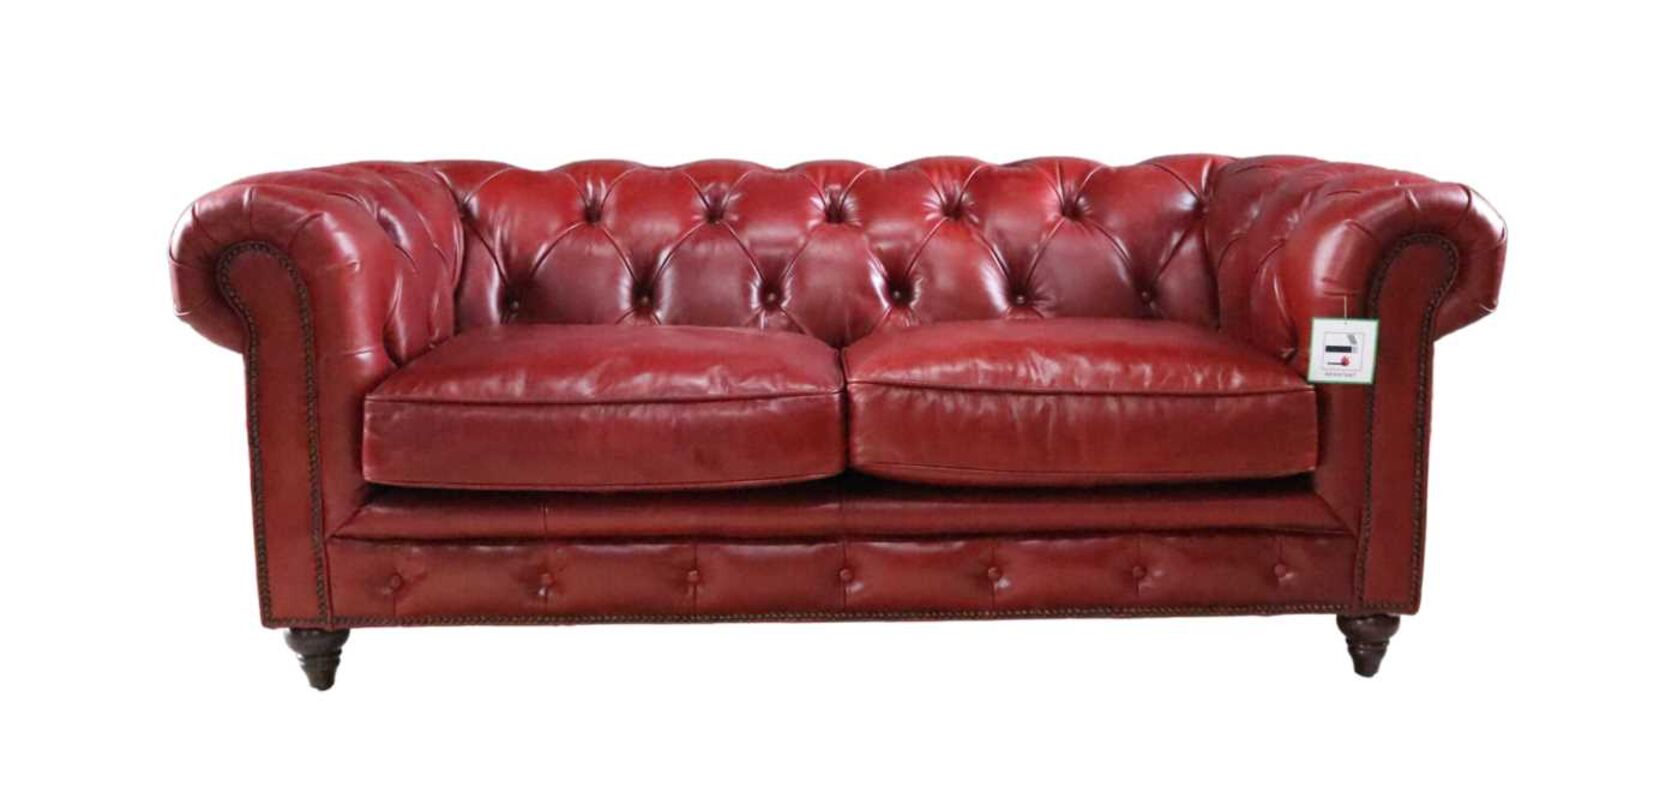 Earle Chesterfield Oxblood Red Leather, Oxblood Red Leather Sofa